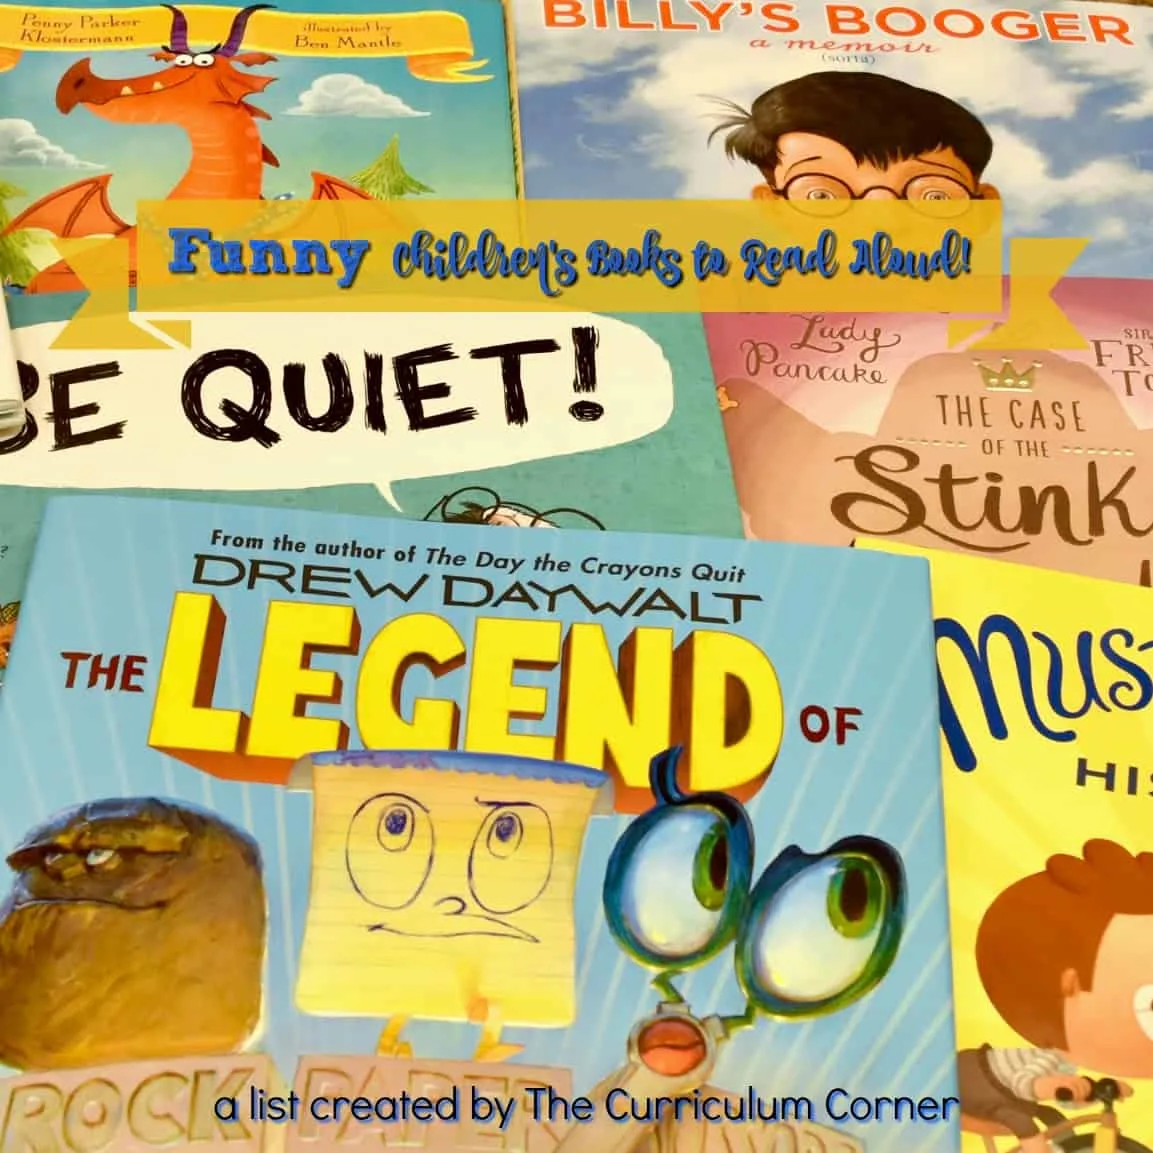 Funny Children's Books to Read Aloud by The Curriculum Corner